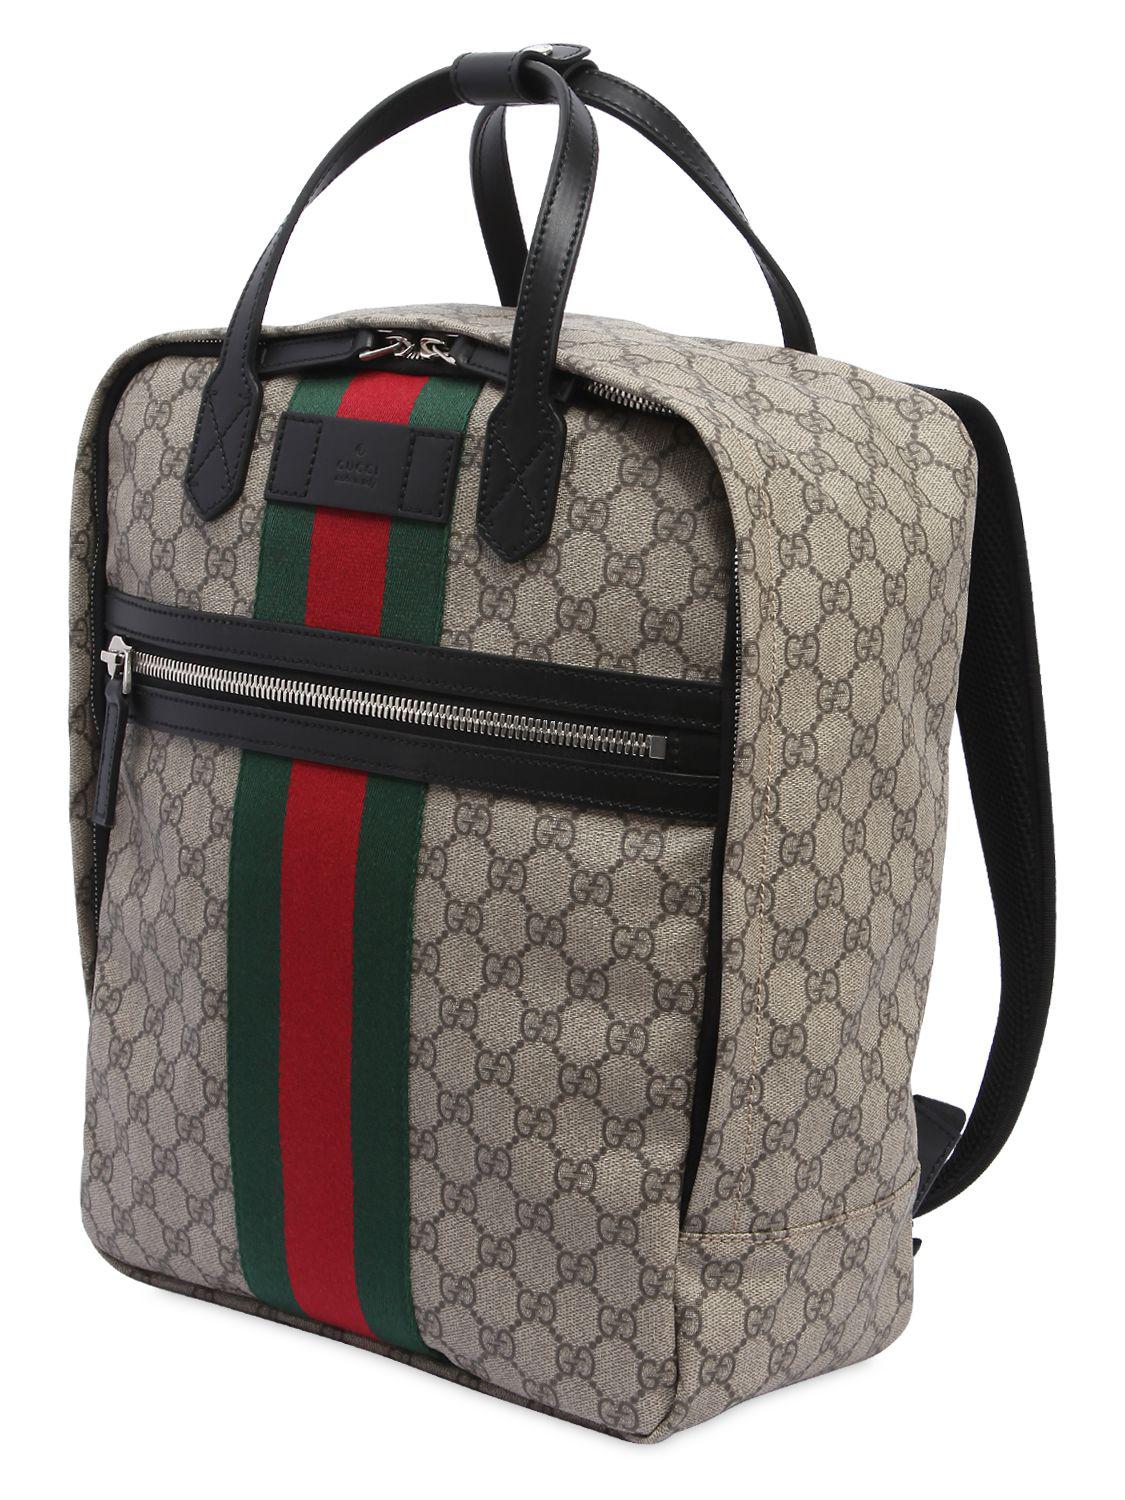 Gucci Synthetic Gg Supreme Backpack in Beige (Natural) - Lyst